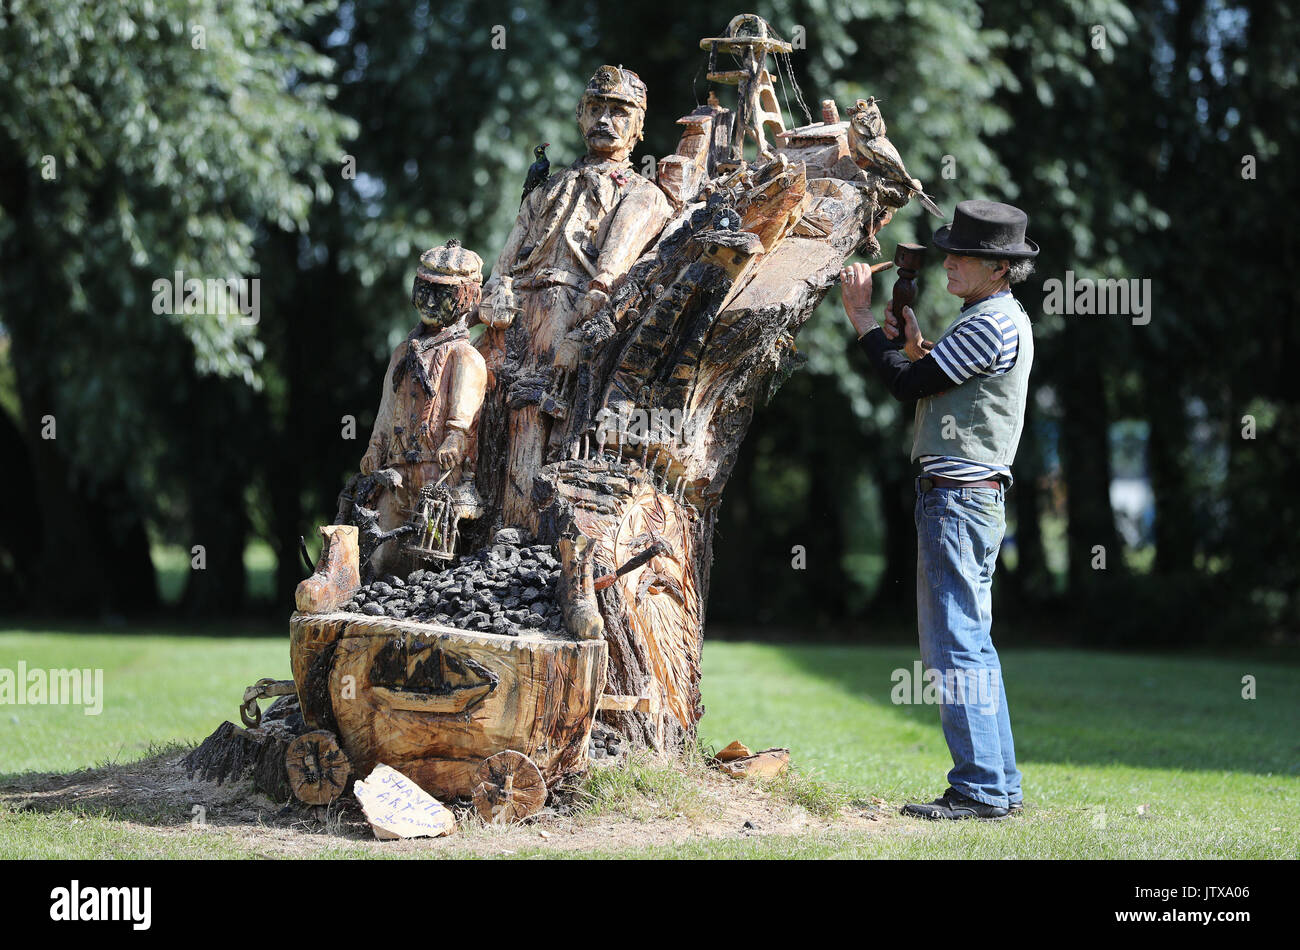 Boat Builder Tom Newstead, 70, from Seaton Sluice, with his carving of a mining scene which took him 3 months to complete, in a white willow which the council ordered to be cut down due to being unsafe, in Seat Deleval in Northumberland. Stock Photo